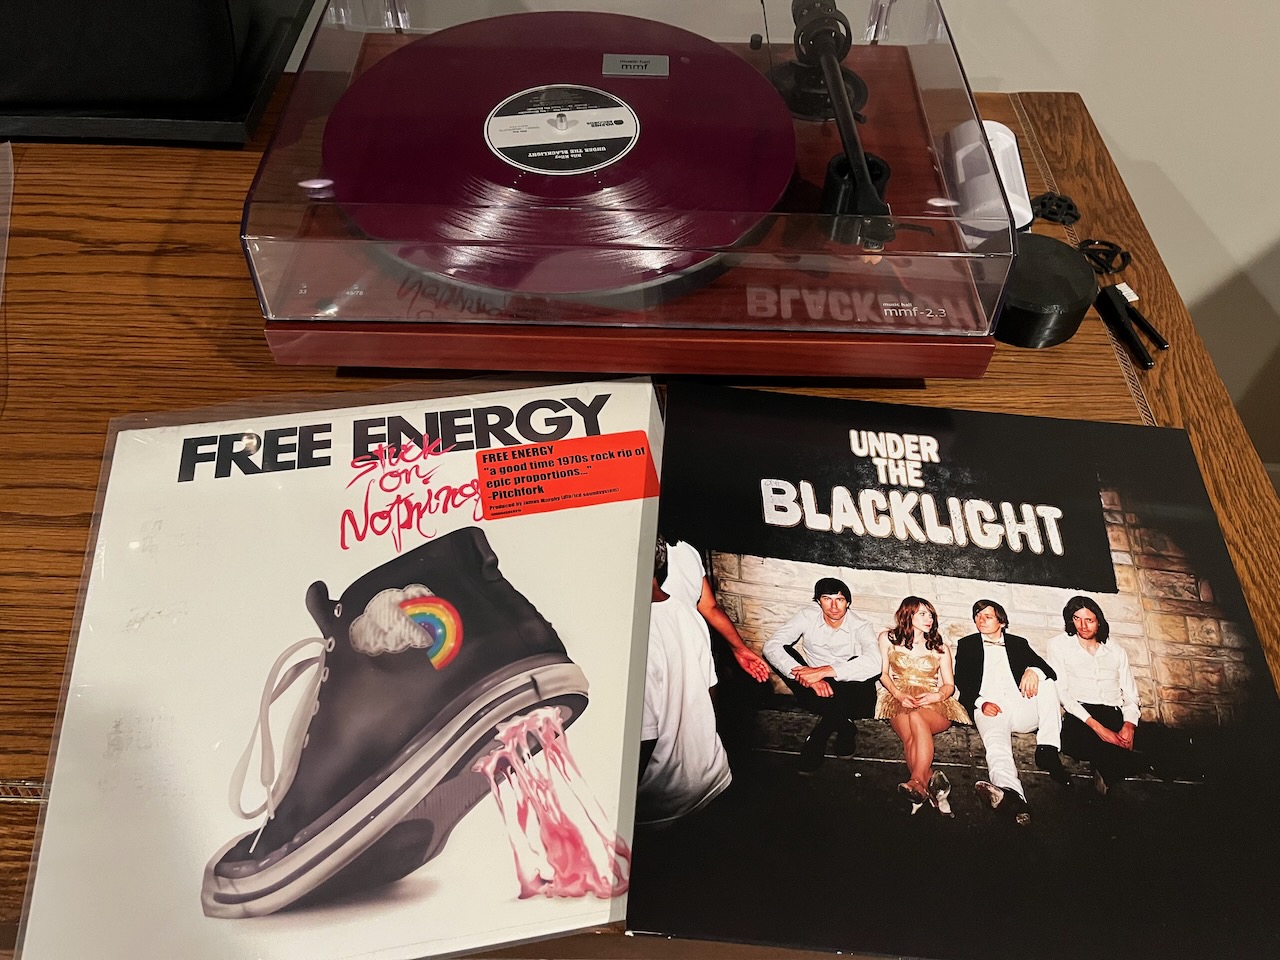 In front of my record player lay two albums, on the left Free Energy’s Stuck on Nothing and on the right, Rilo Kiley’s Under the Blacklight